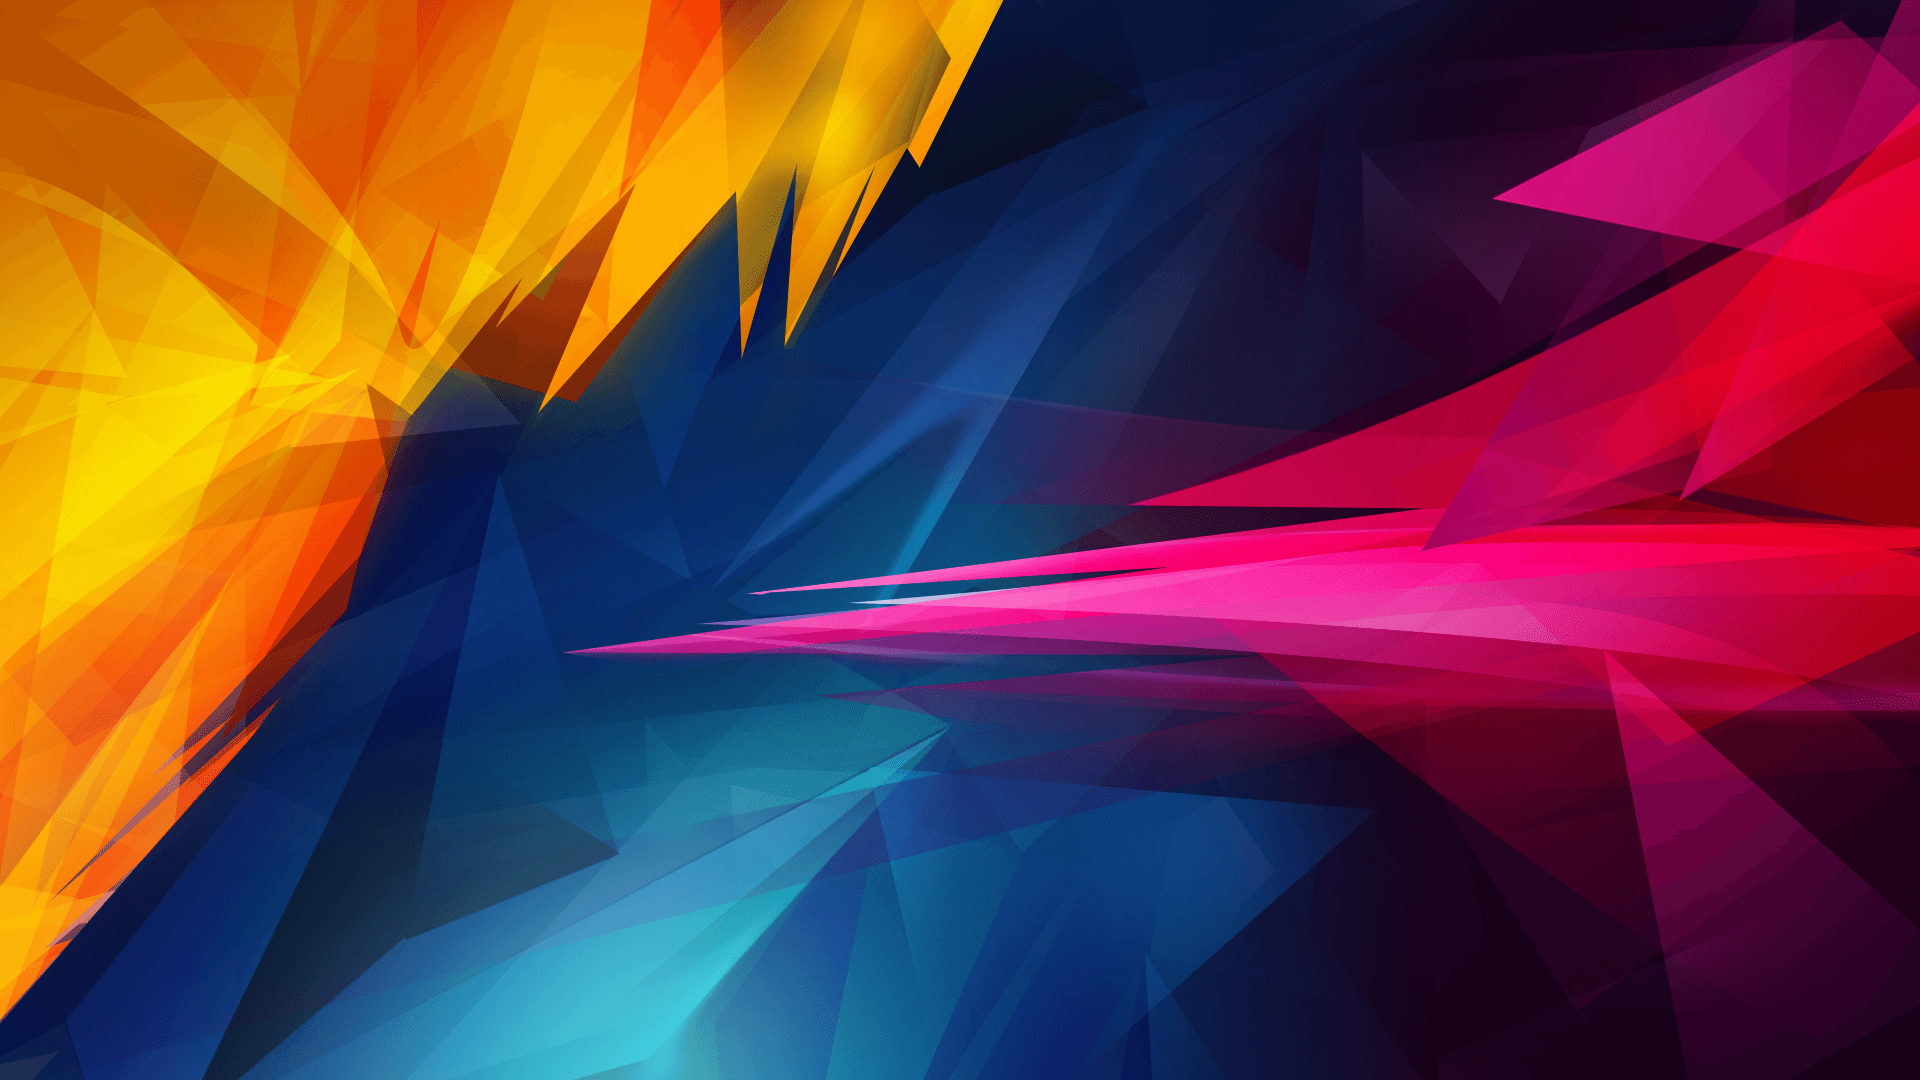 Wallpaper Of Abstract 848